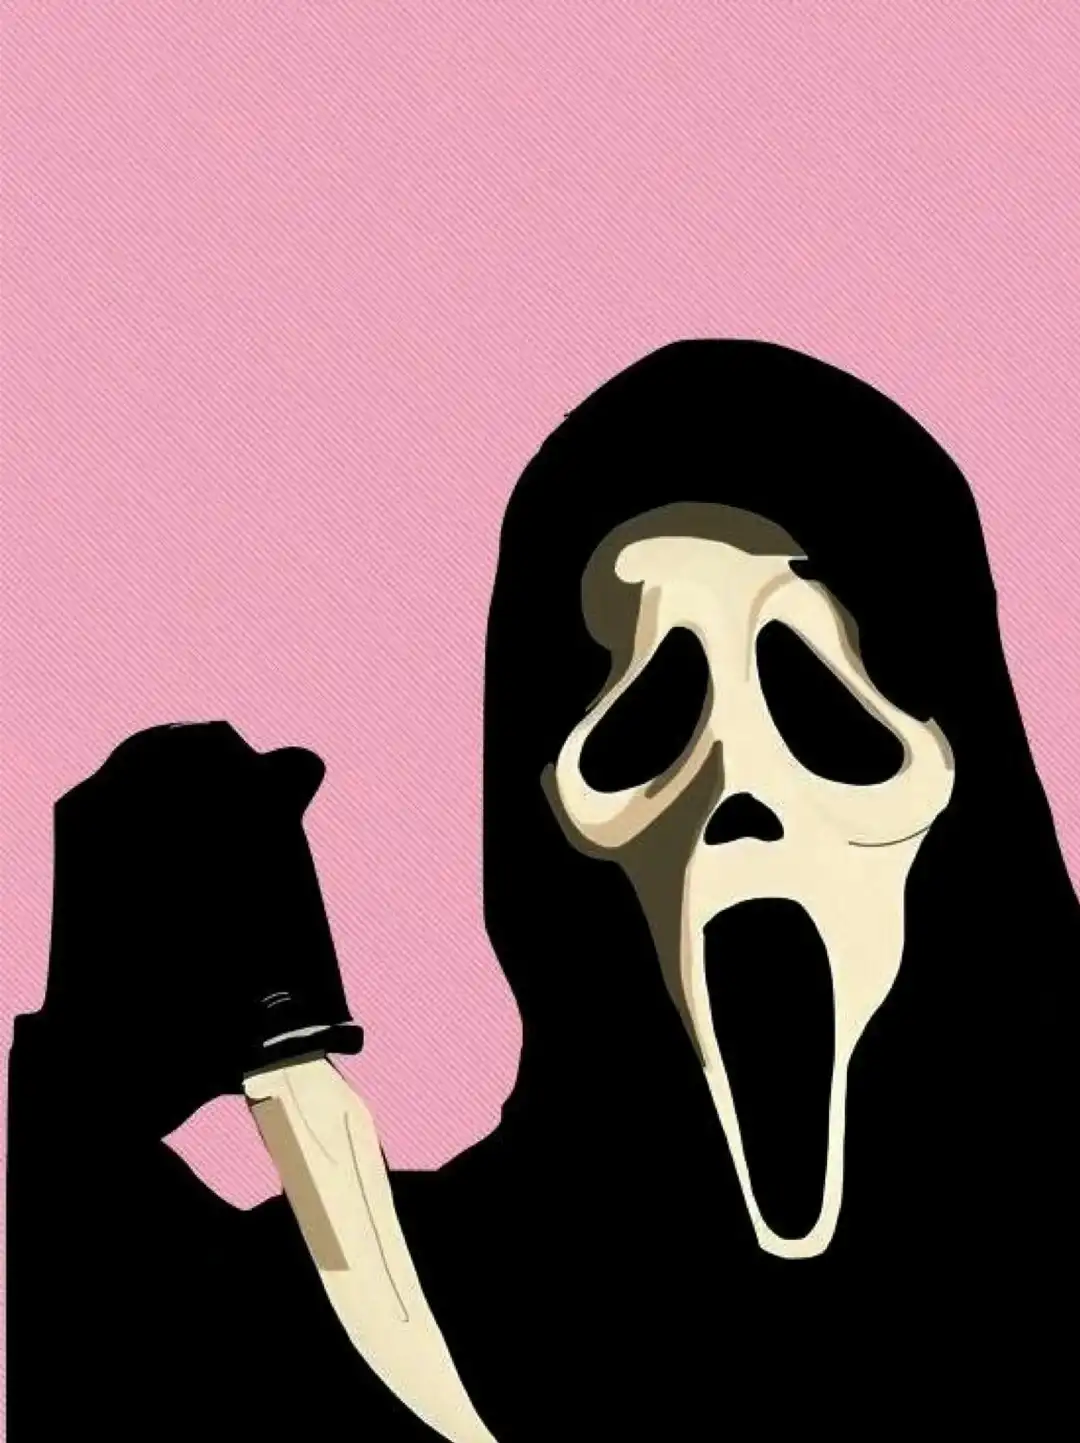 A ghostface scream mask holding a knife in front of a pink background - Ghostface